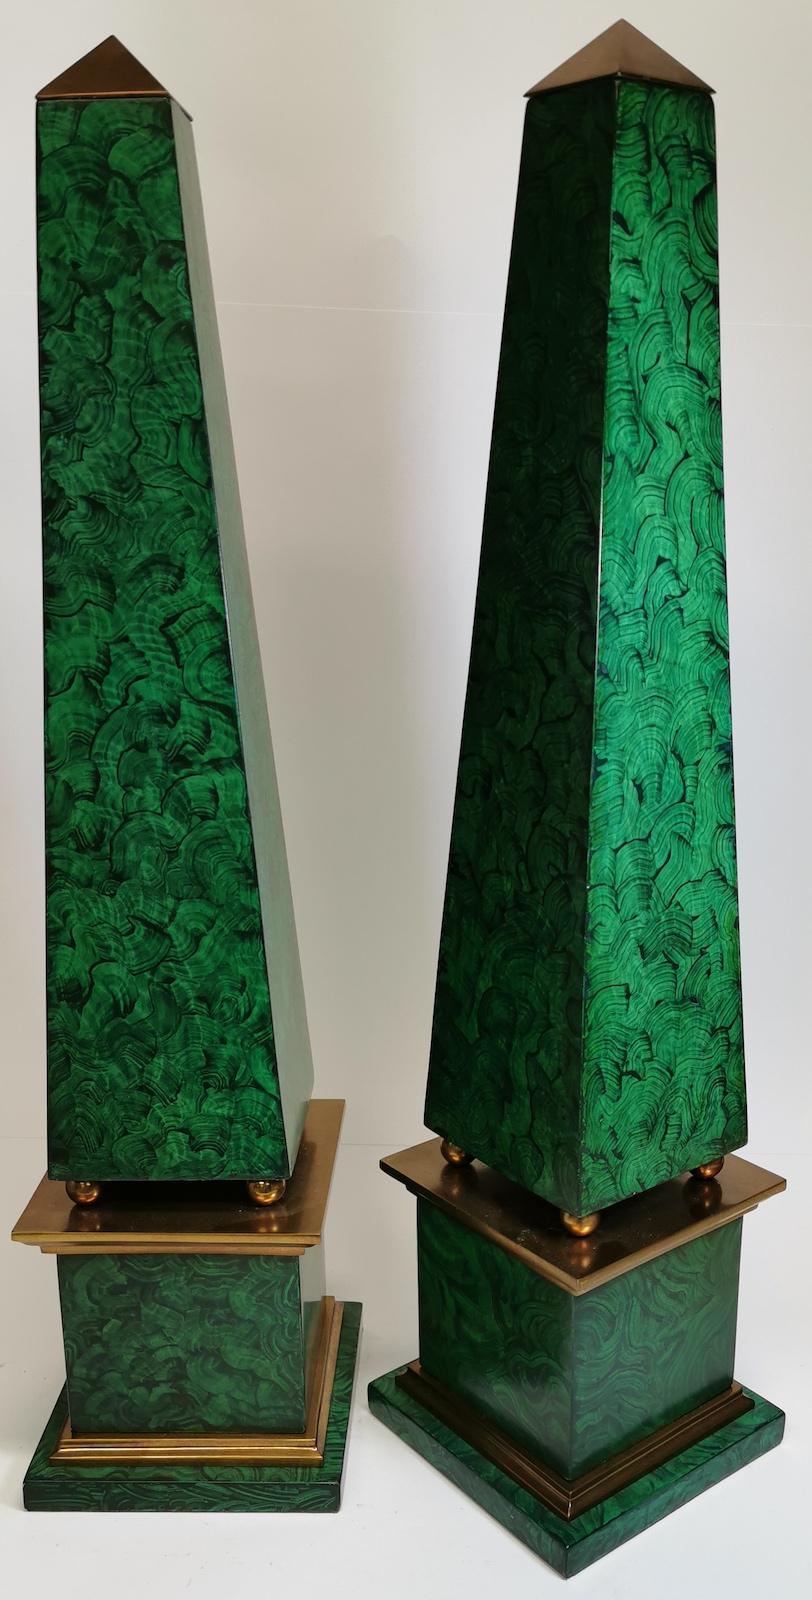 Pair of hand painted faux malachite obelisks with brass accents,
Price is for the pair
Measures: 14 x 64cm high
Our eclectic stock crosses cultures, continents, styles and famous names.





 